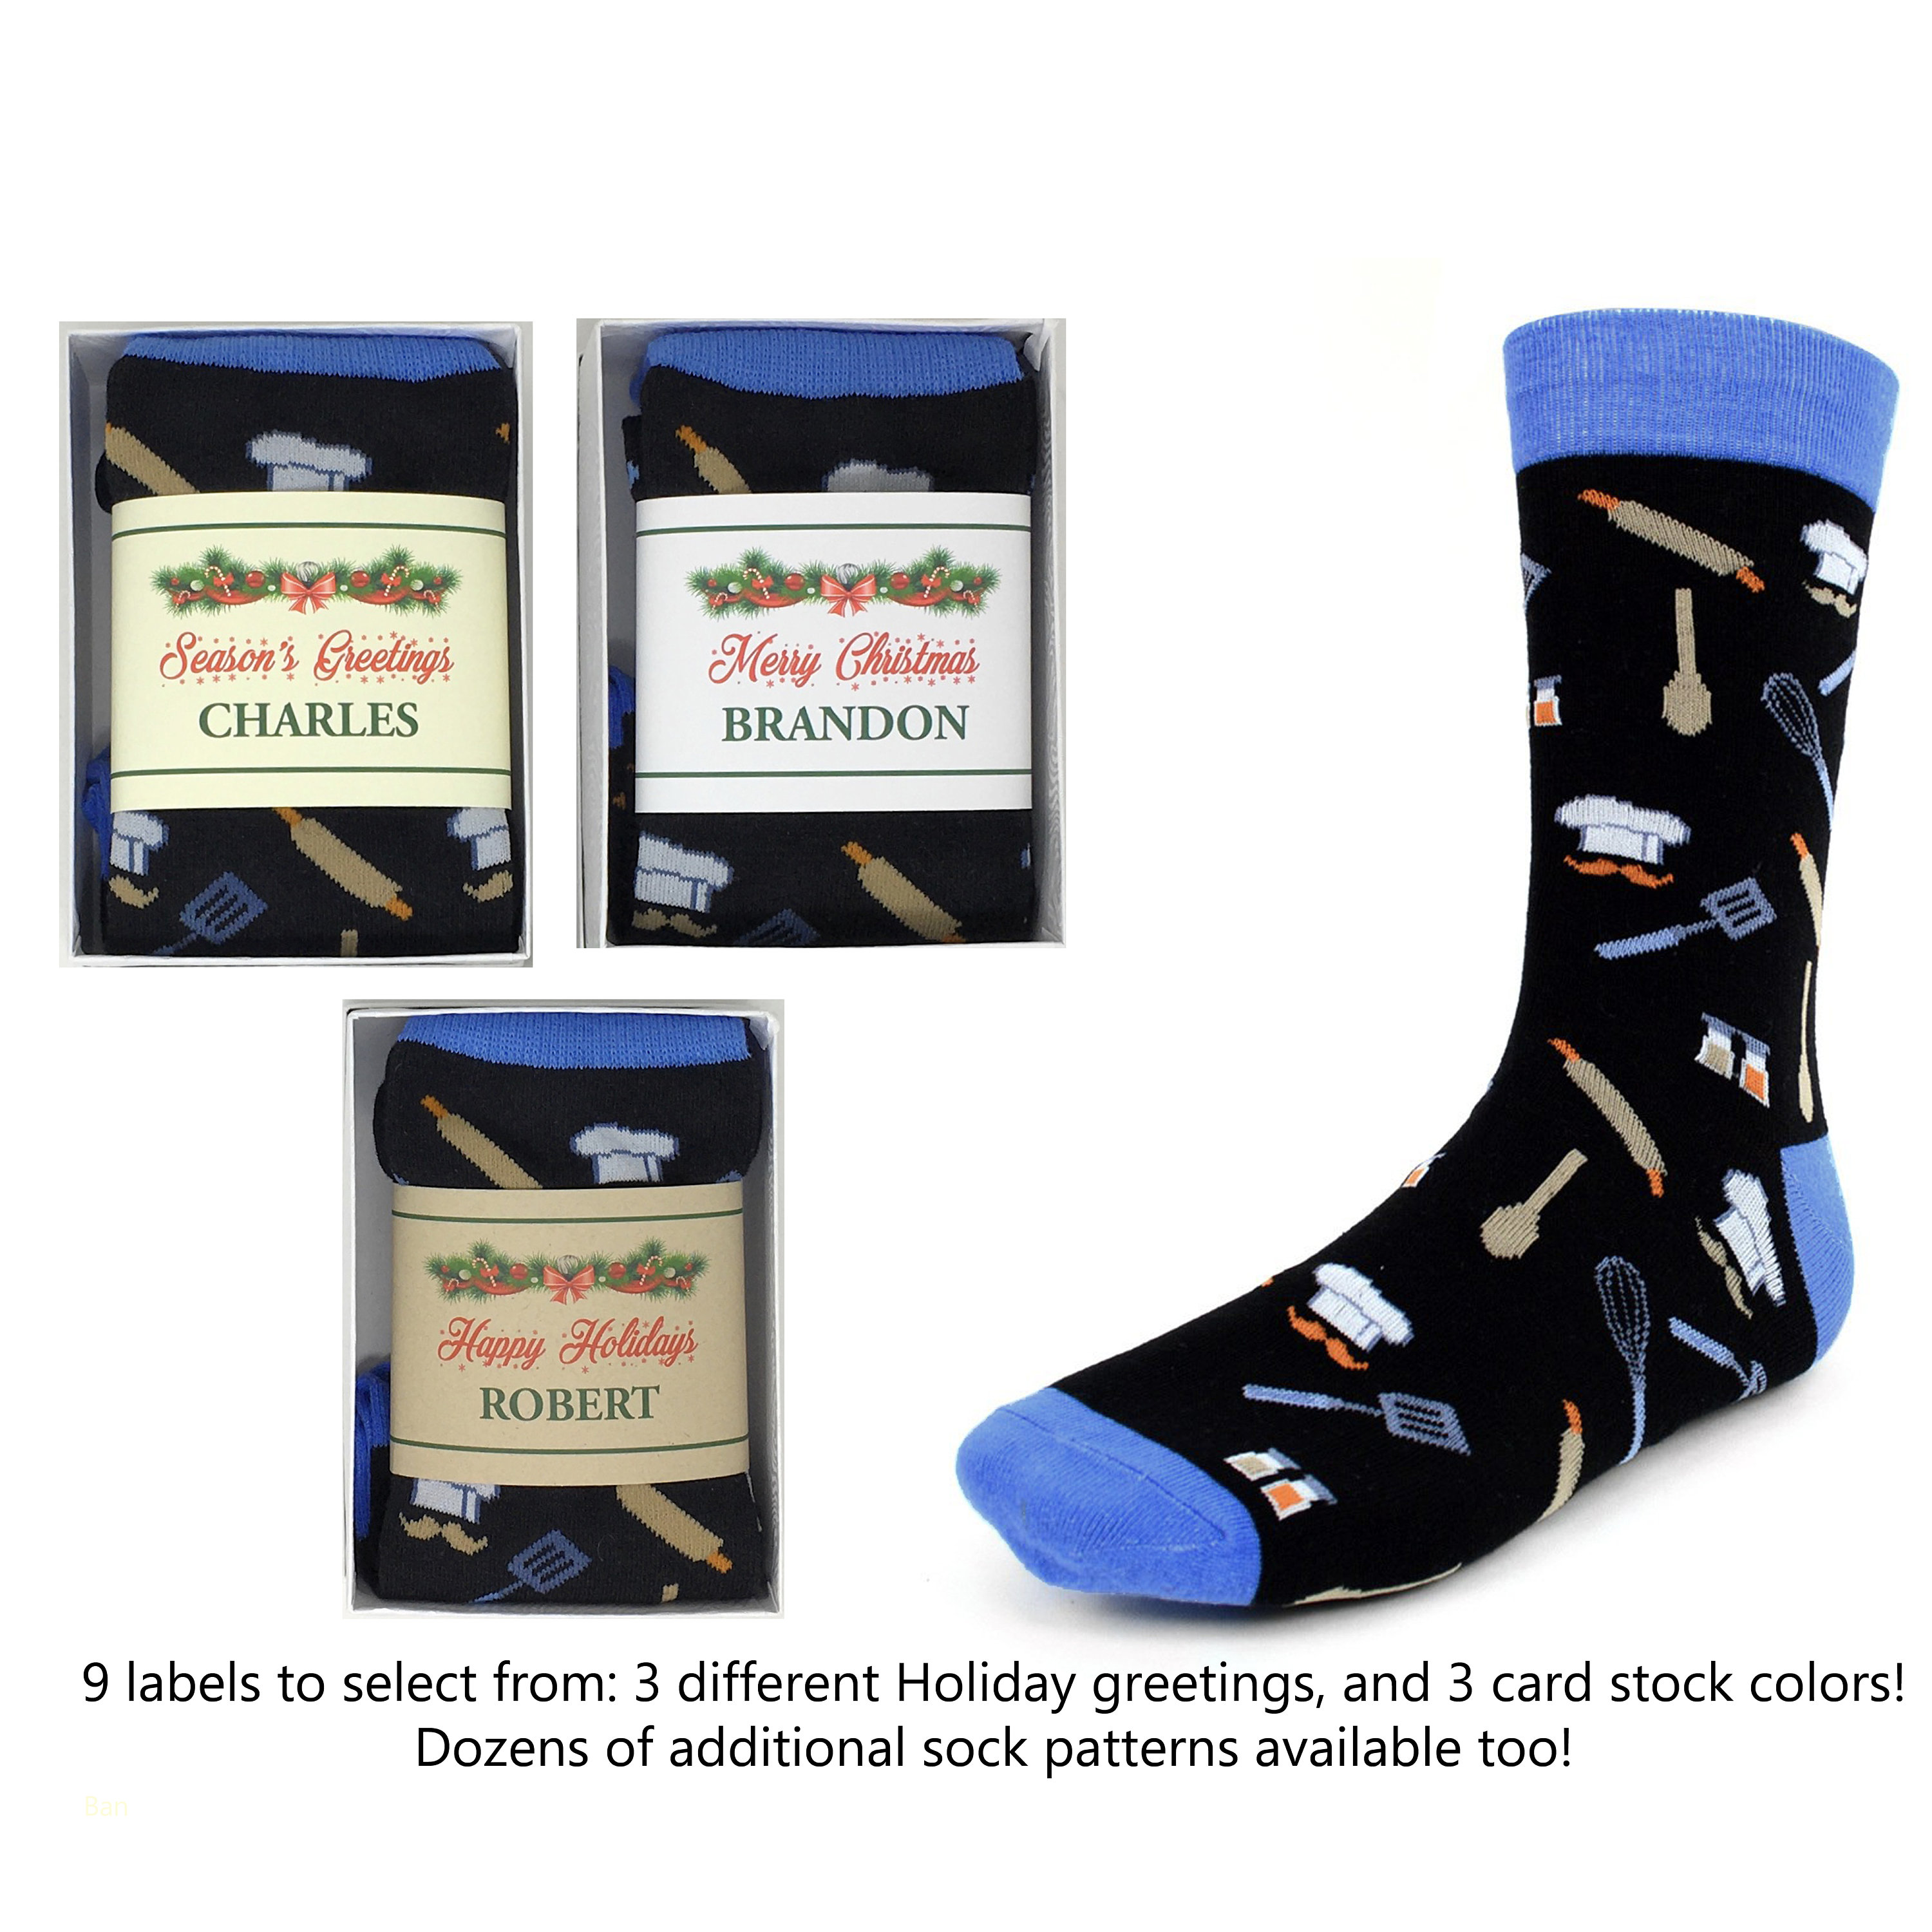 Unisex Cooking Socks, Cooking Gifts for Chefs, Pastry Chefs, Cooks, Bakers, Cookie Bakers, Cooking Enthusiasts, Bread Makers, Novelty Women Men